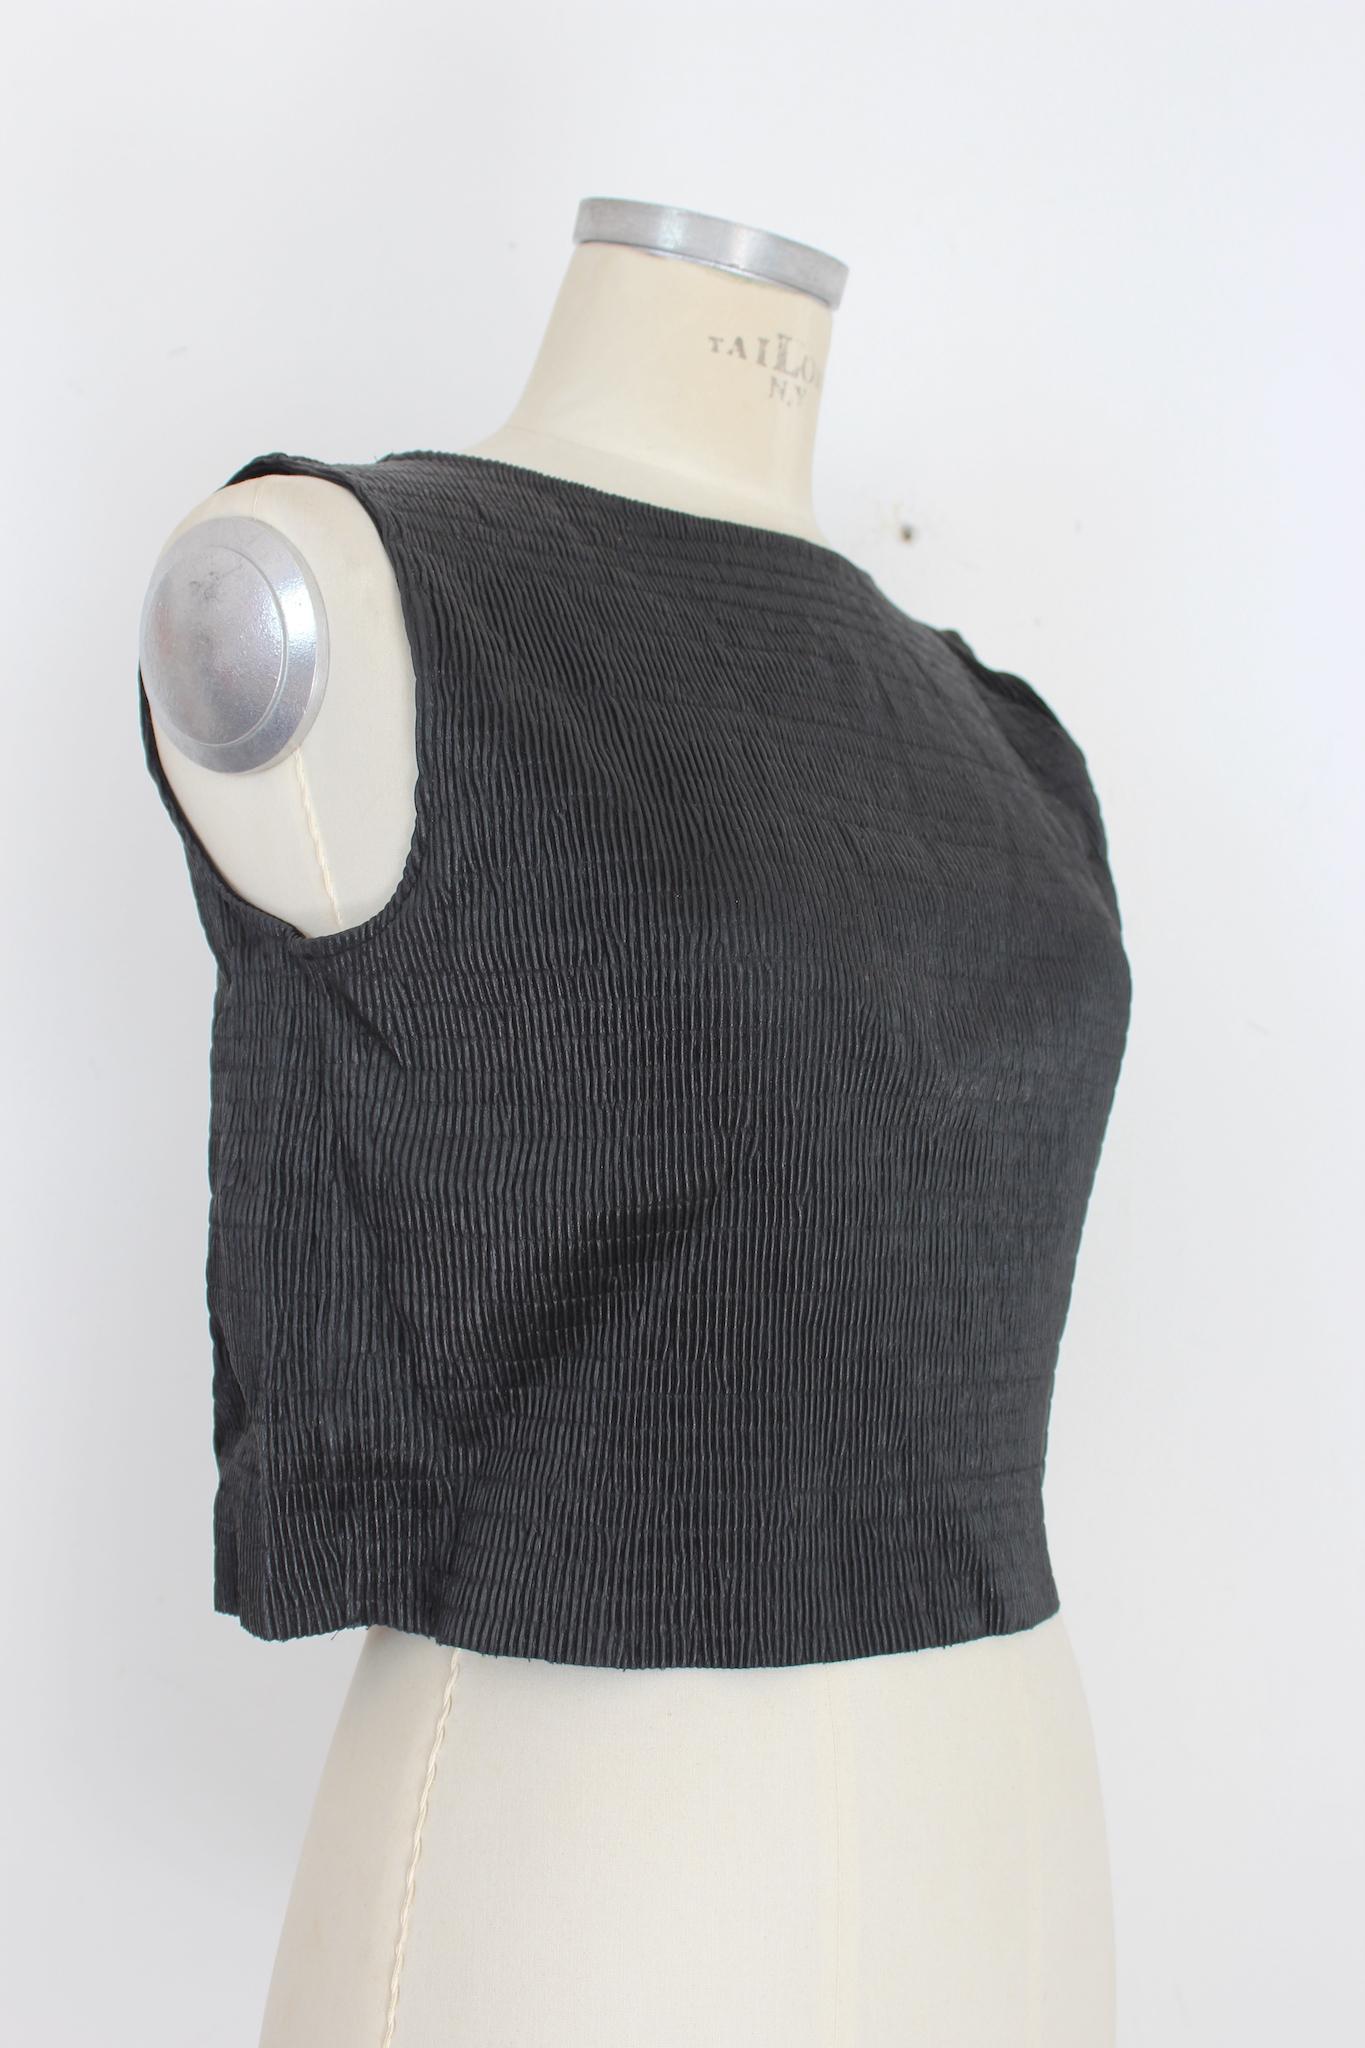 This vintage Krizia top from the 80s is a unique and edgy addition to any wardrobe. Made from high-quality faux leather, the black top features intricate pleating details and a short length. The cropped design adds a touch of sophistication while